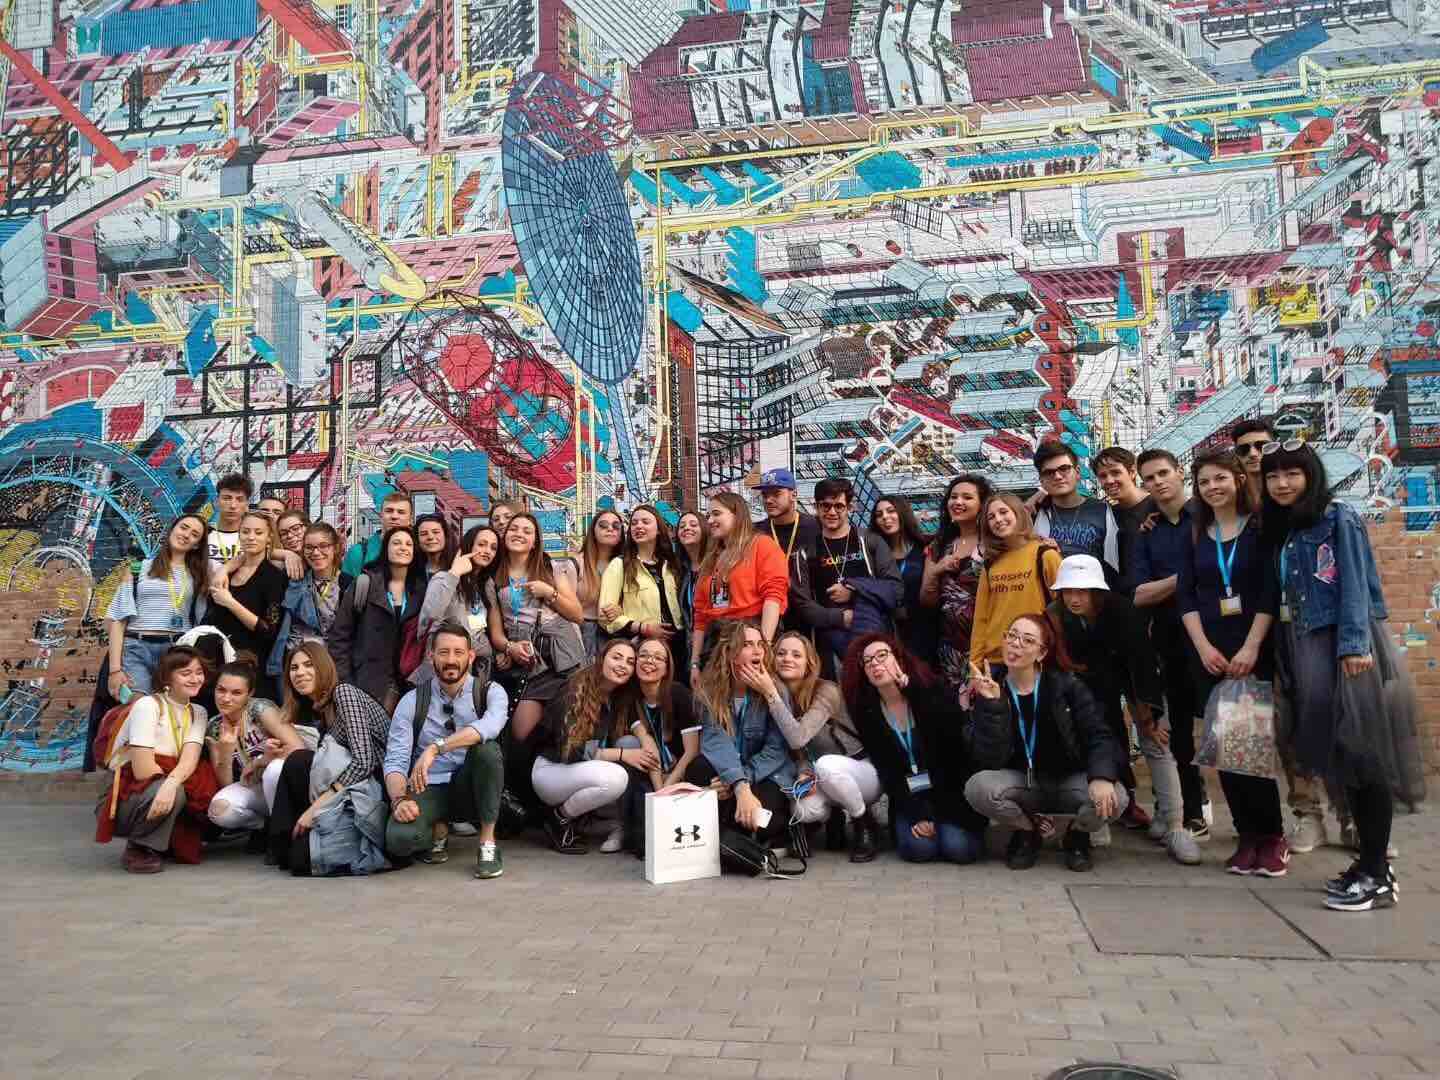 Italy meets China - Our students from Ancona, on their last day in Beijing, at the 798 Art District